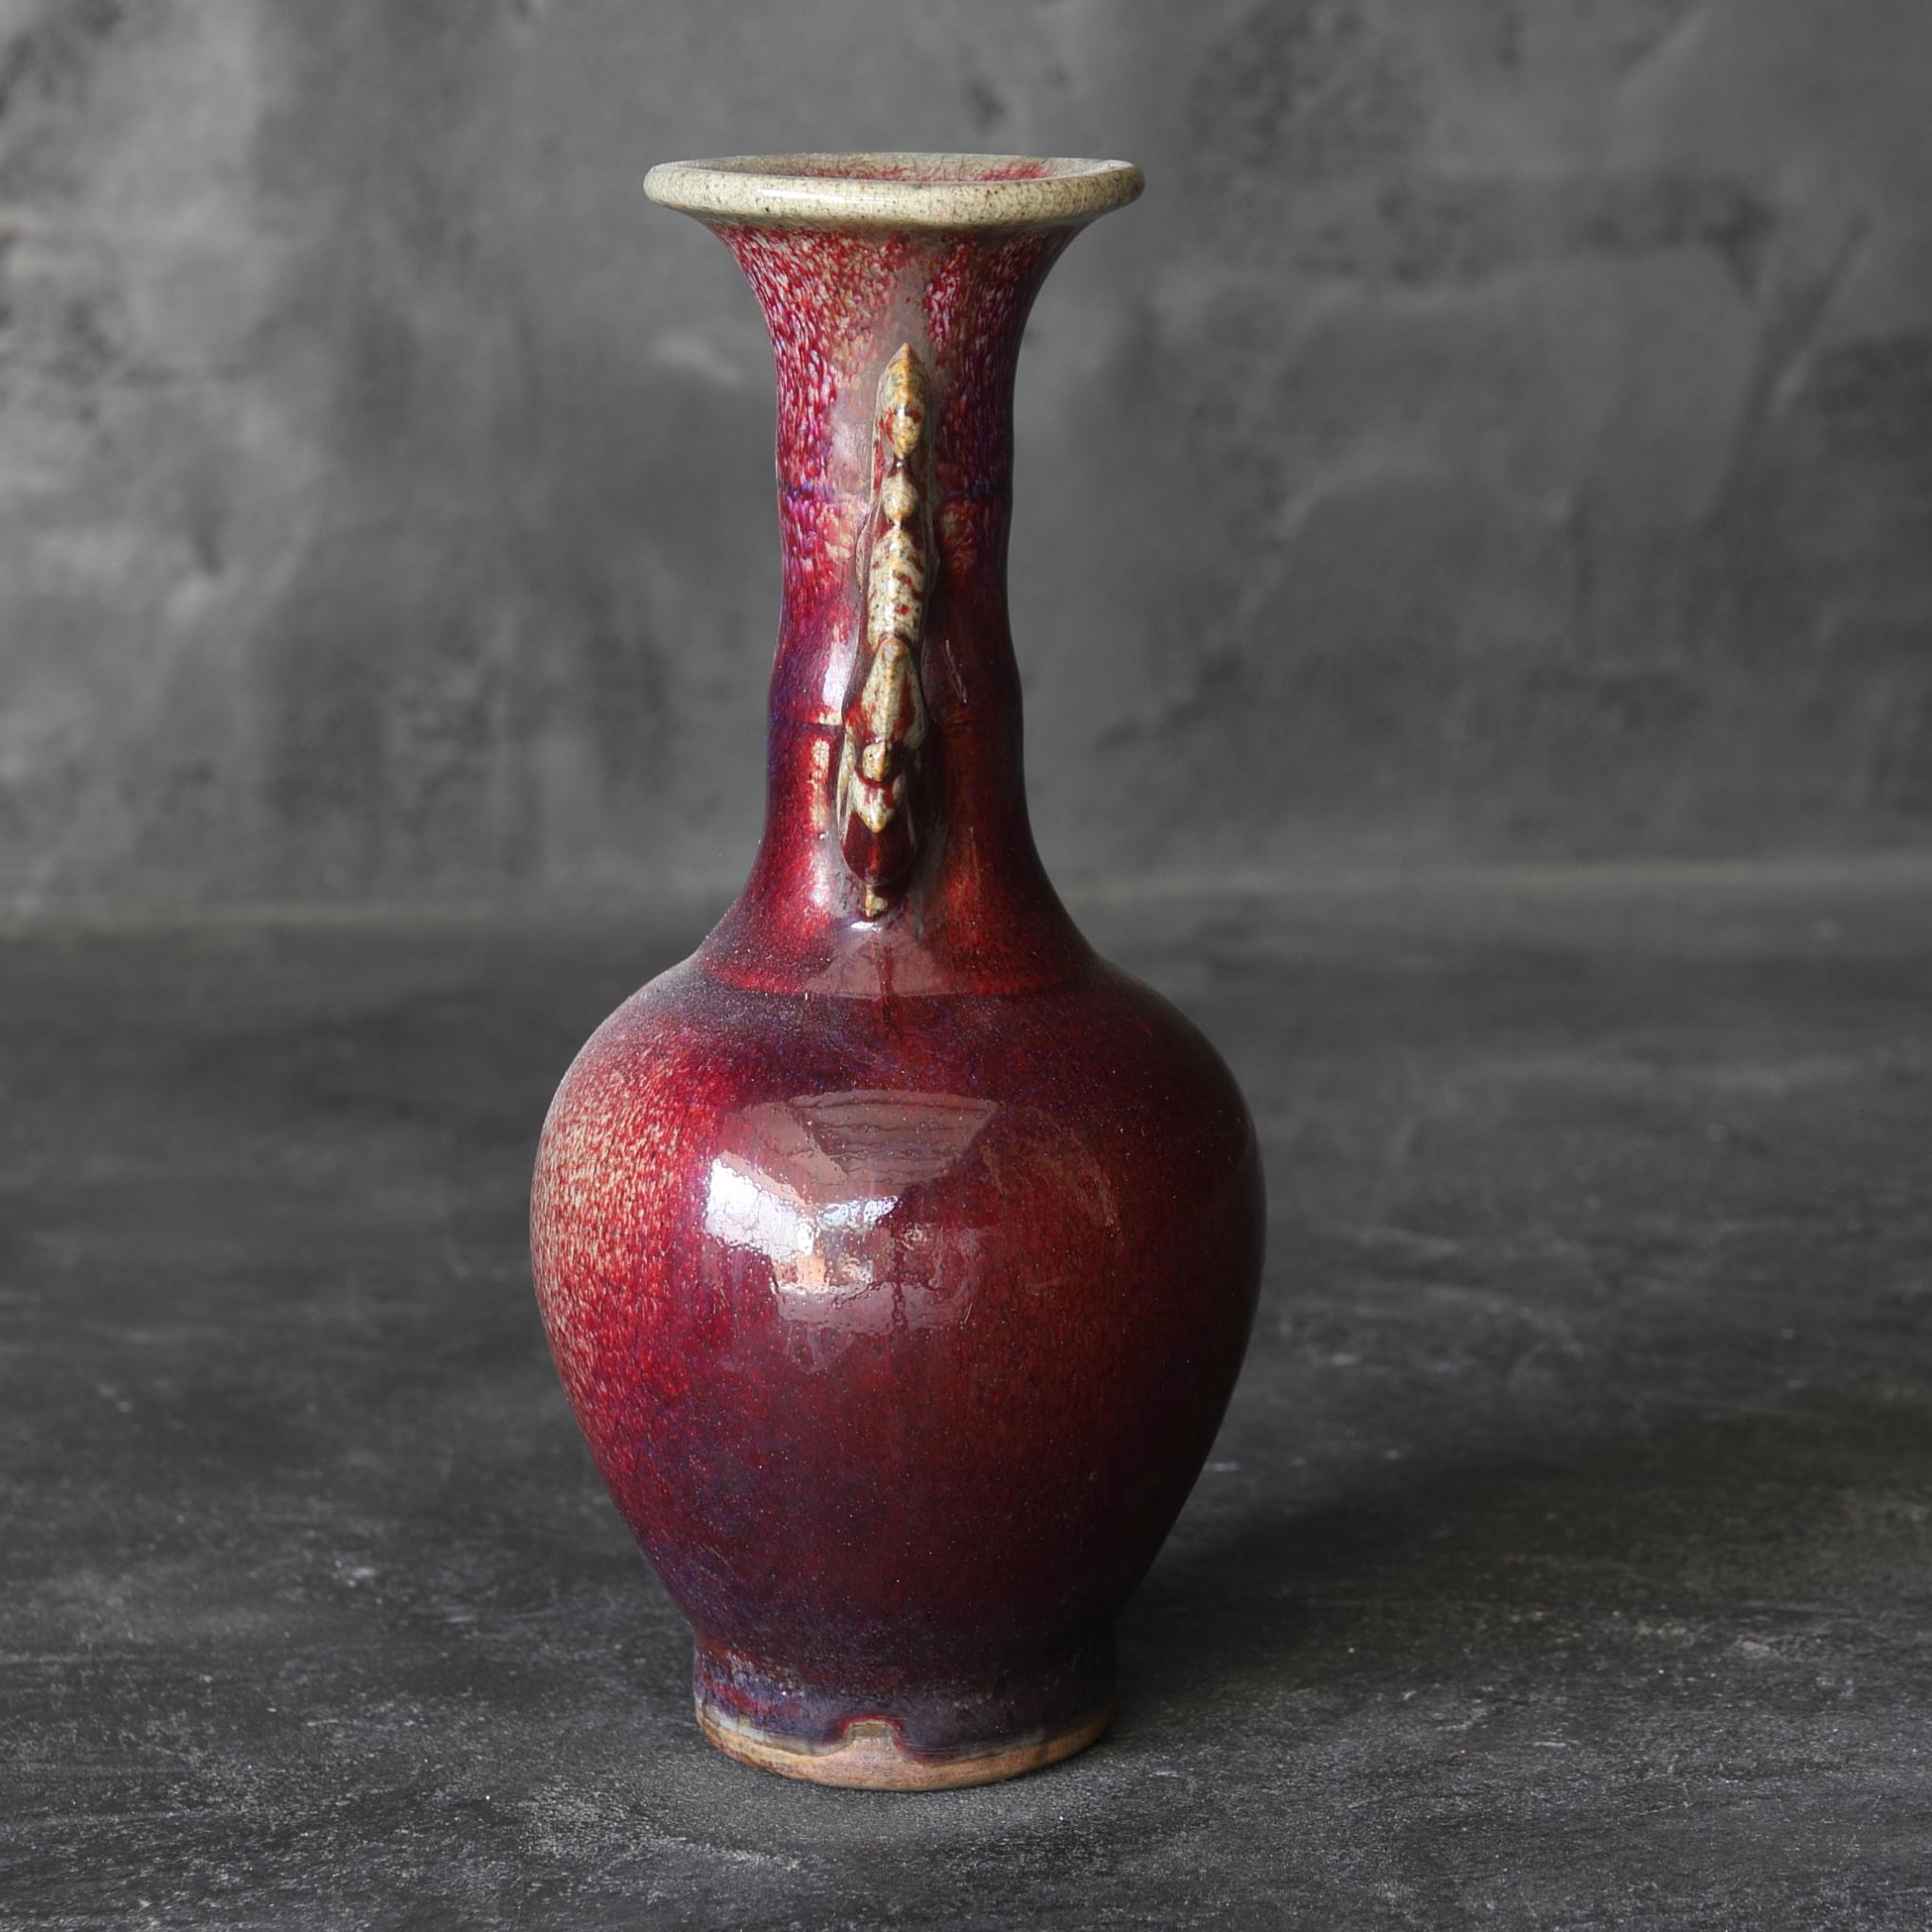 Ceramic Jun Ware Vase with Red Glaze and Dragon Ears / Chinese Antiques / Qing Dynasty For Sale